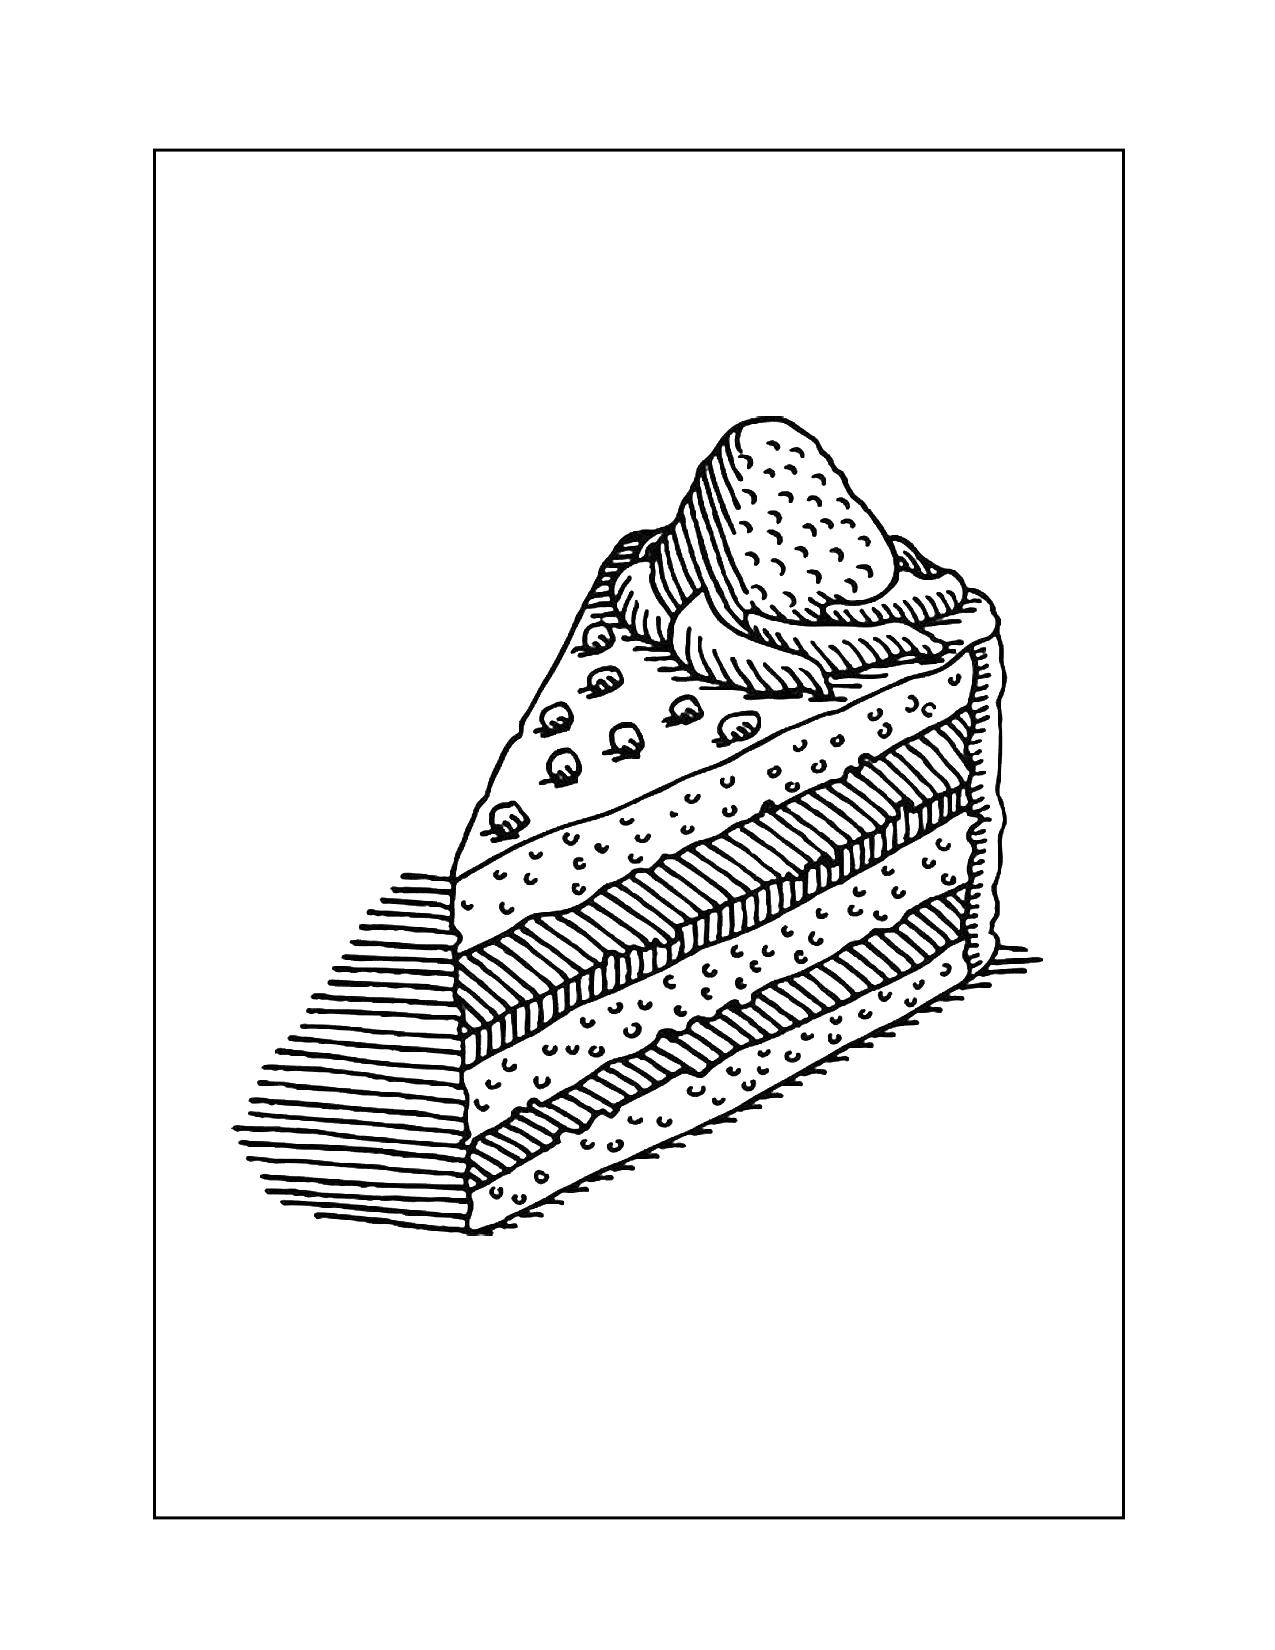 Strawberry Cake Coloring Page